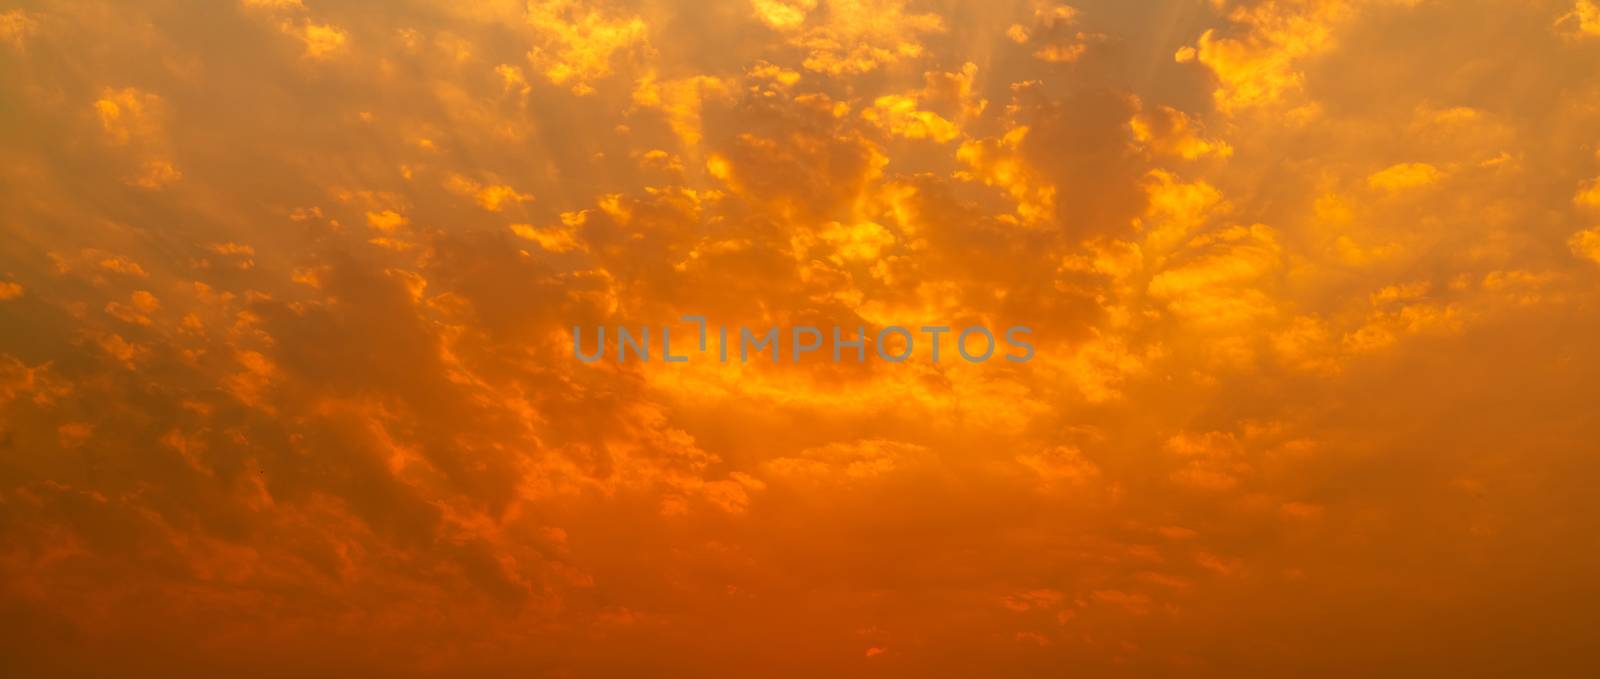 Beautiful sunset sky. Golden sunset sky with beautiful pattern of clouds. Panorama scene of orange cloudy sky background. Beauty in nature. Powerful and spiritual scene. Heaven golden cloudscape.